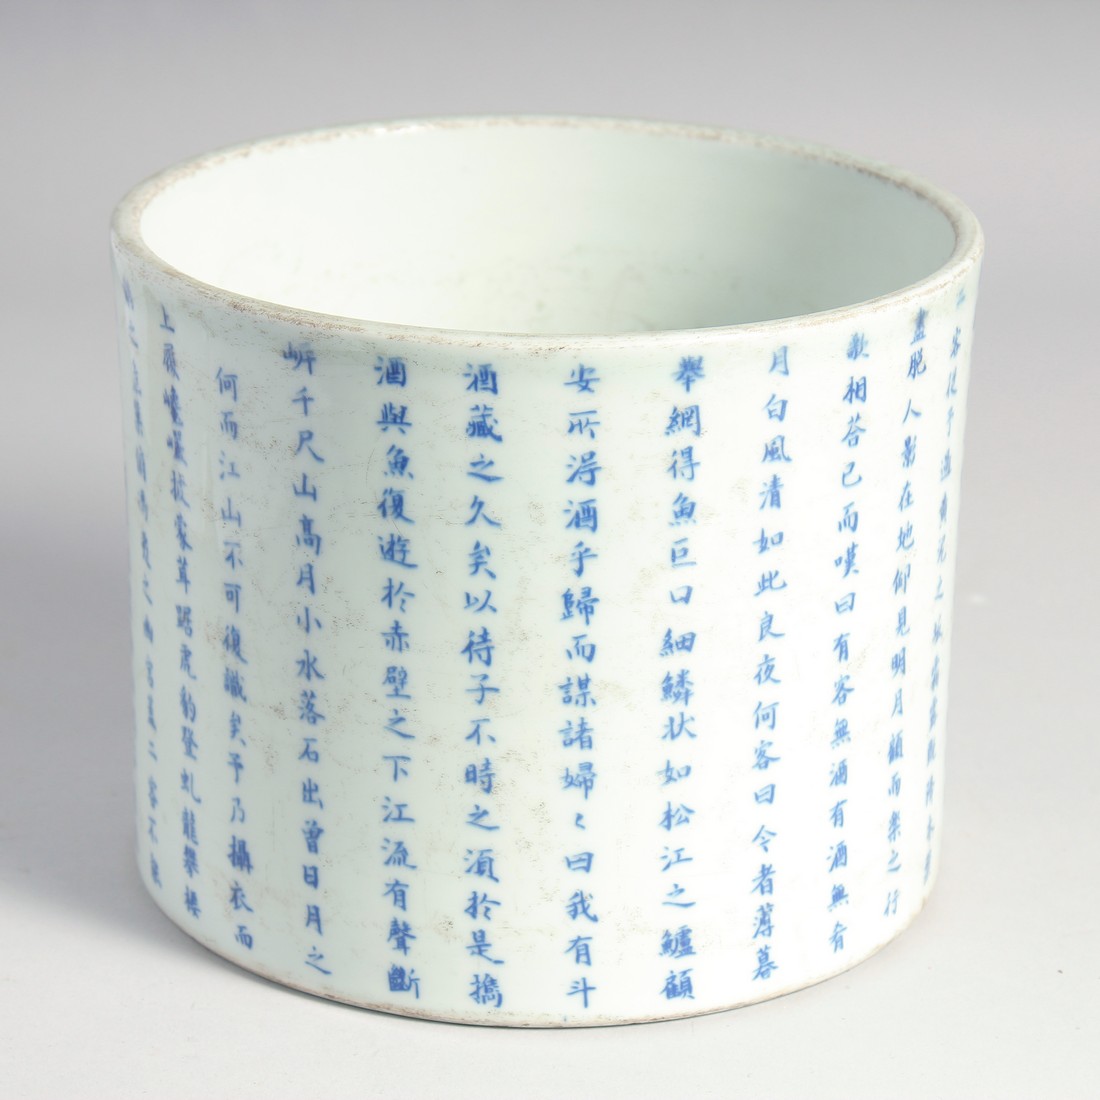 A LARGE CHINESE BLUE AND WHITE PORCELAIN BRUSH POT, the exterior with rows of characters, the base